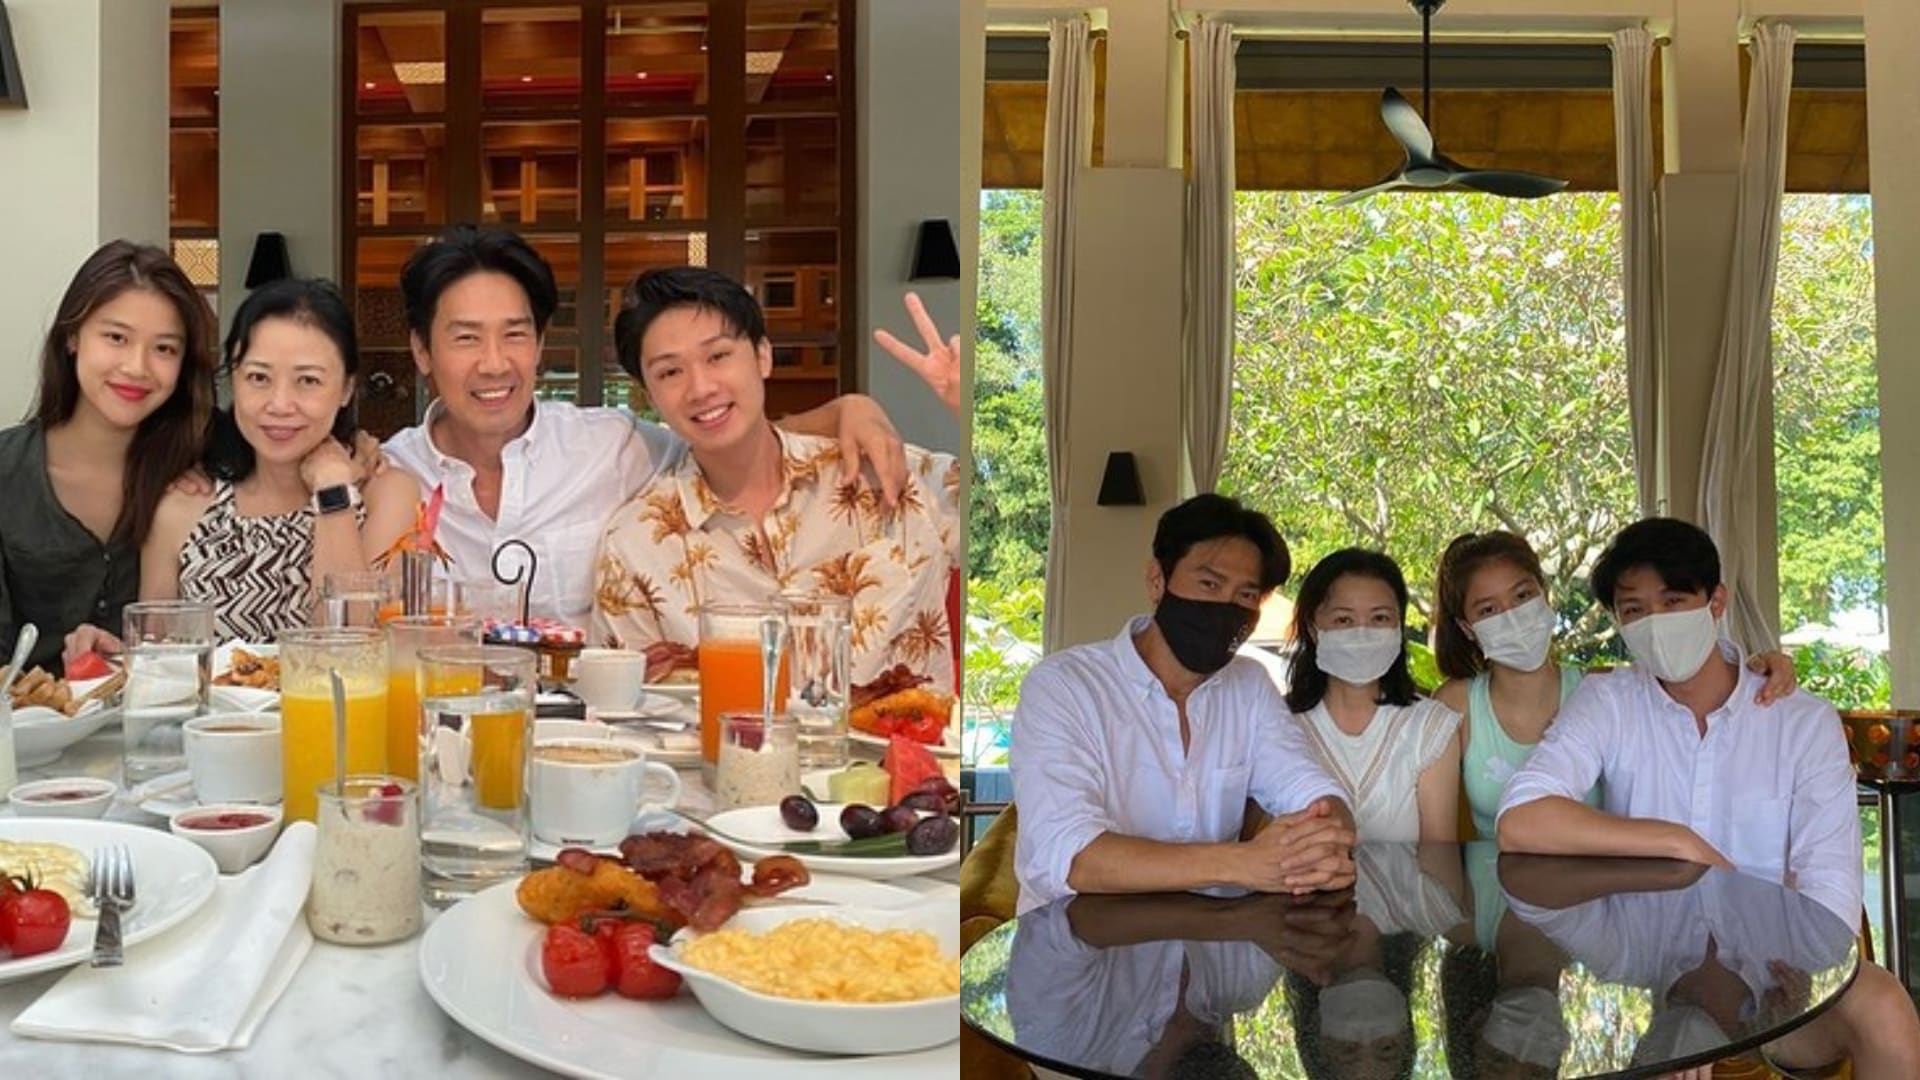 One “Highlight” Of Xiang Yun’s Recent Family Staycation Was Not Getting “Mobbed”, According To Her Son Chen Yixi